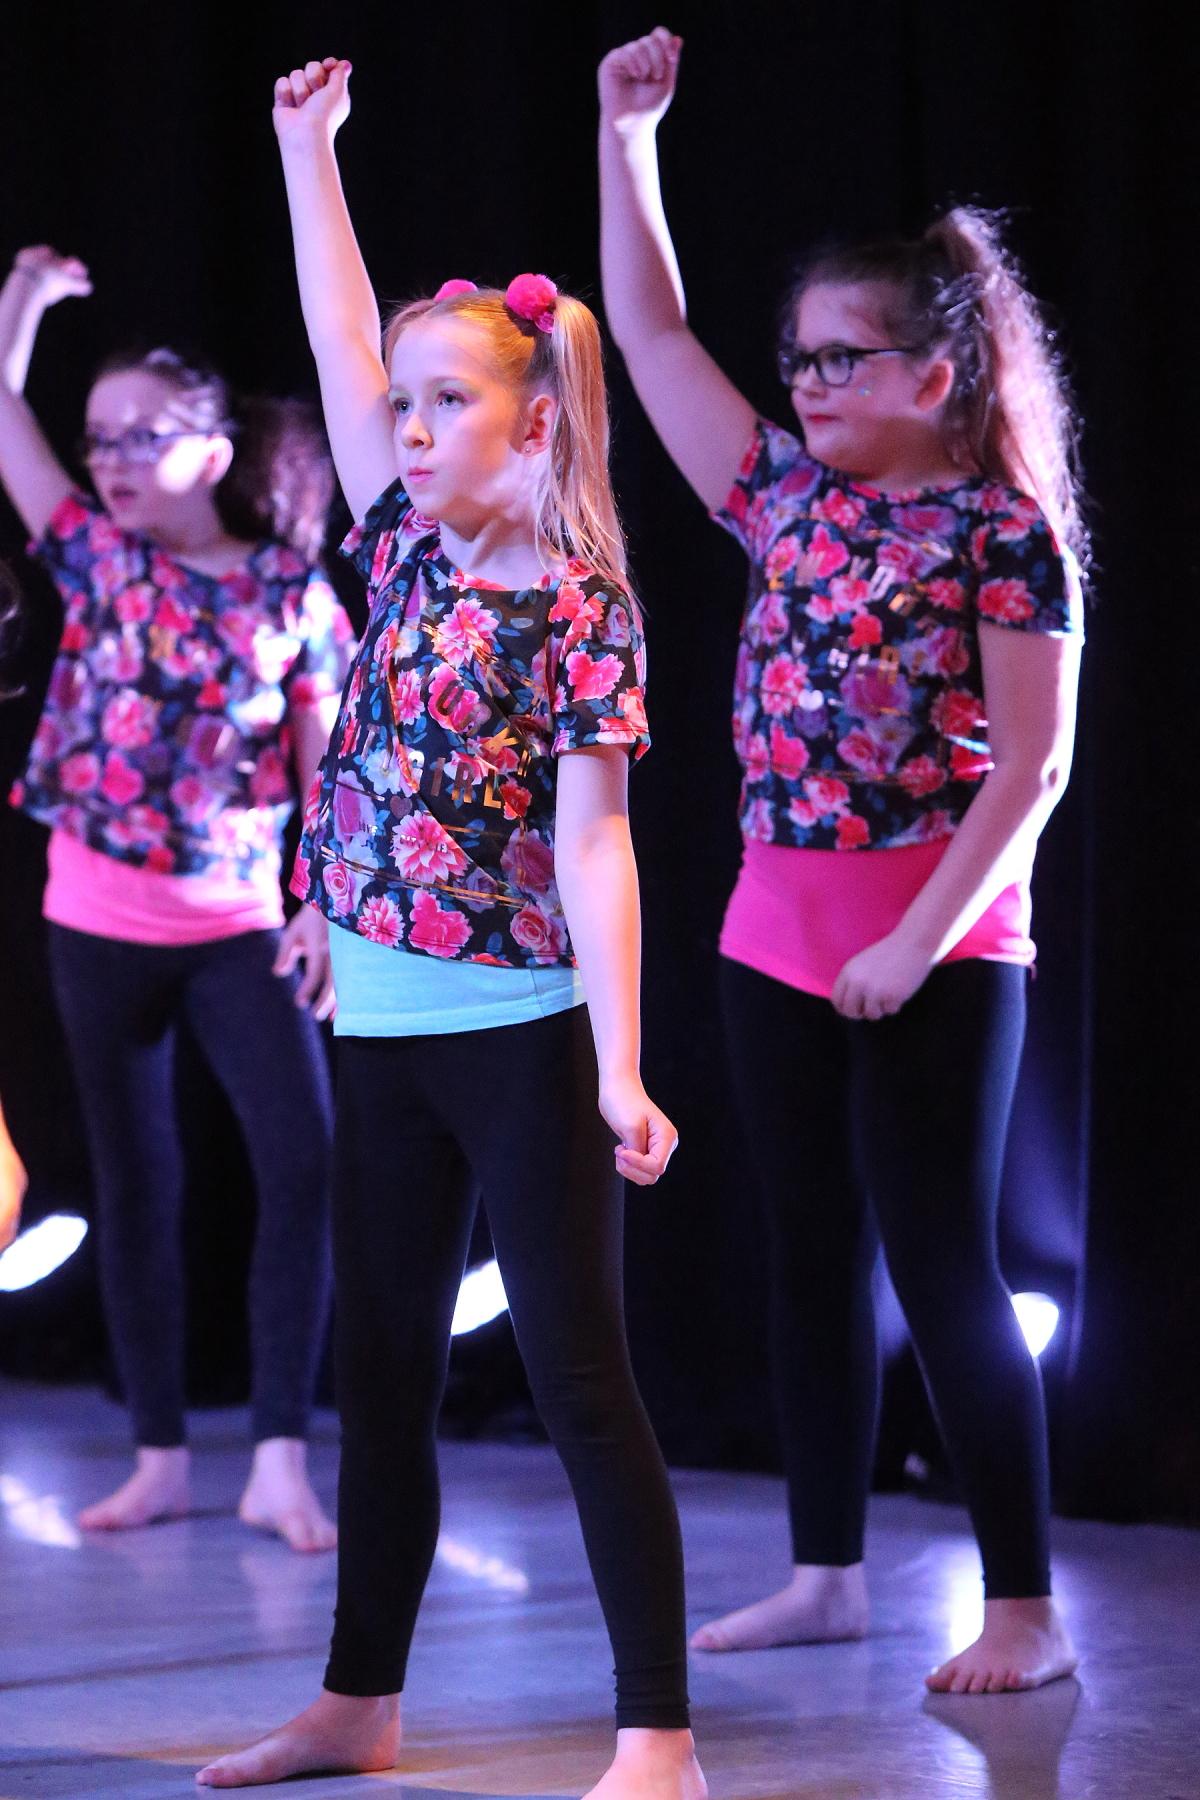 Children and students from schools across West Essex take part in the Motiv8 Youth Dance Showcase at Epping Forest College. Loughton. (21/3/2016) EL87428